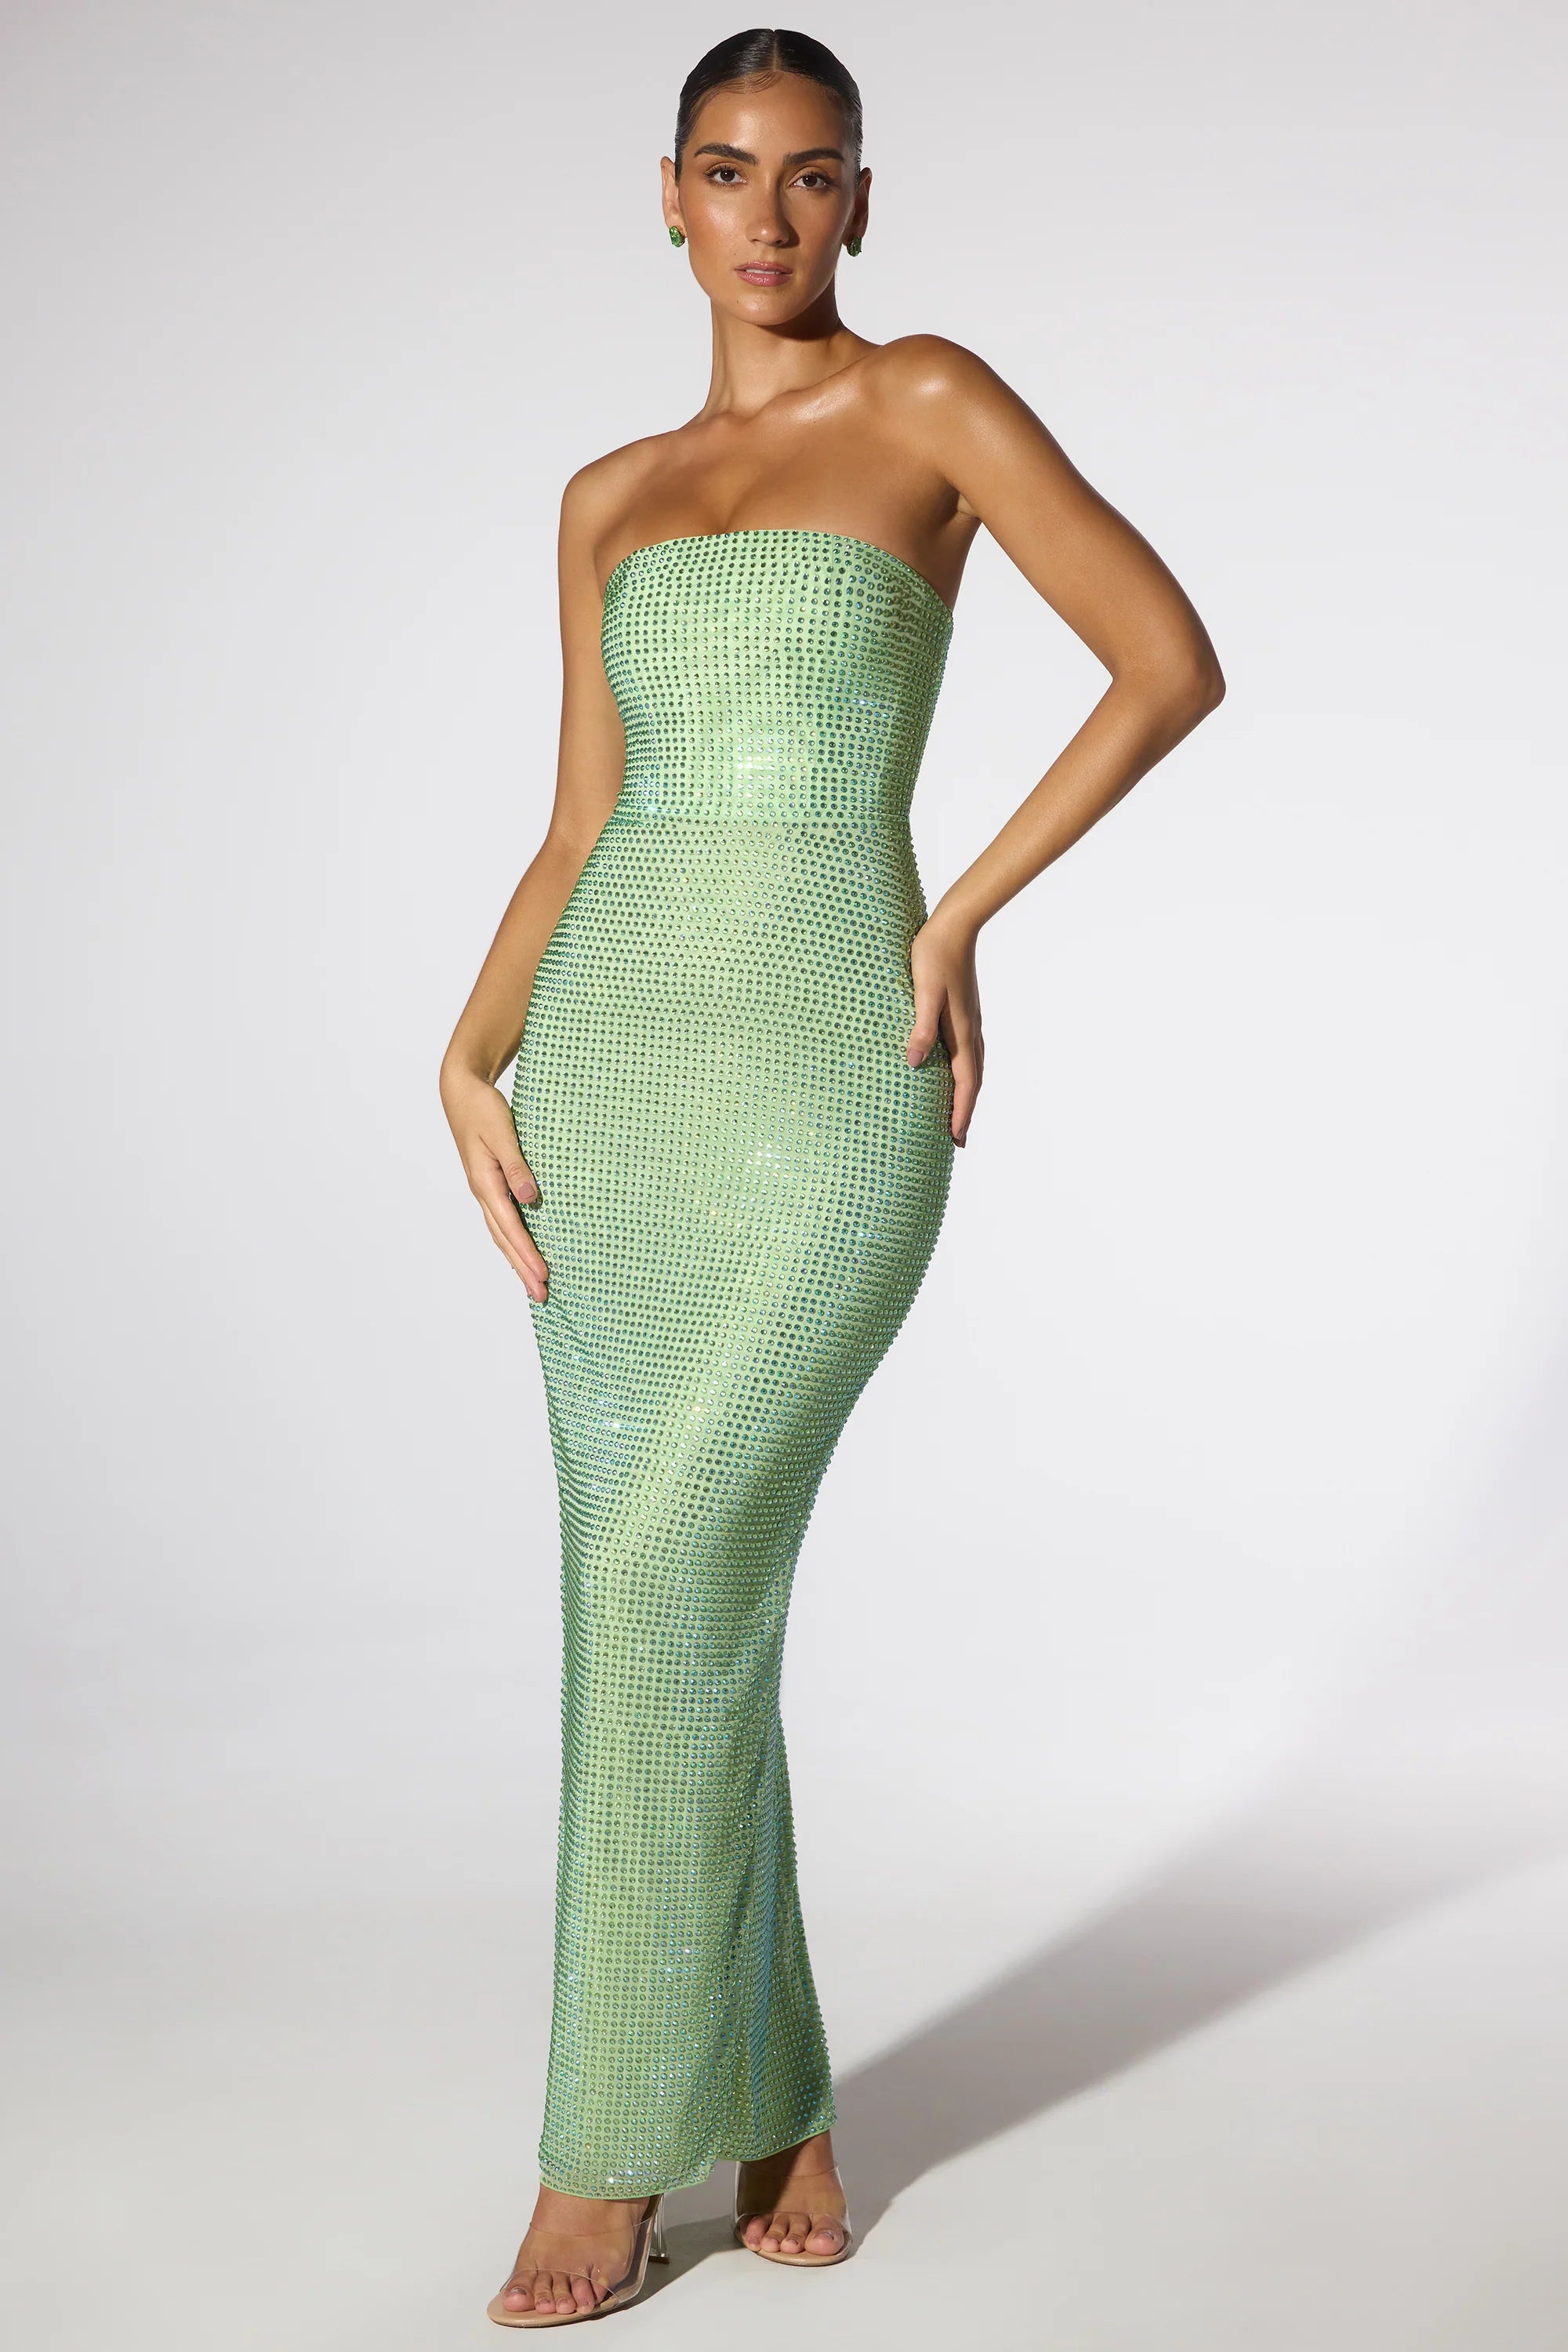 Embellished Strapless Evening Gown in Sage Green